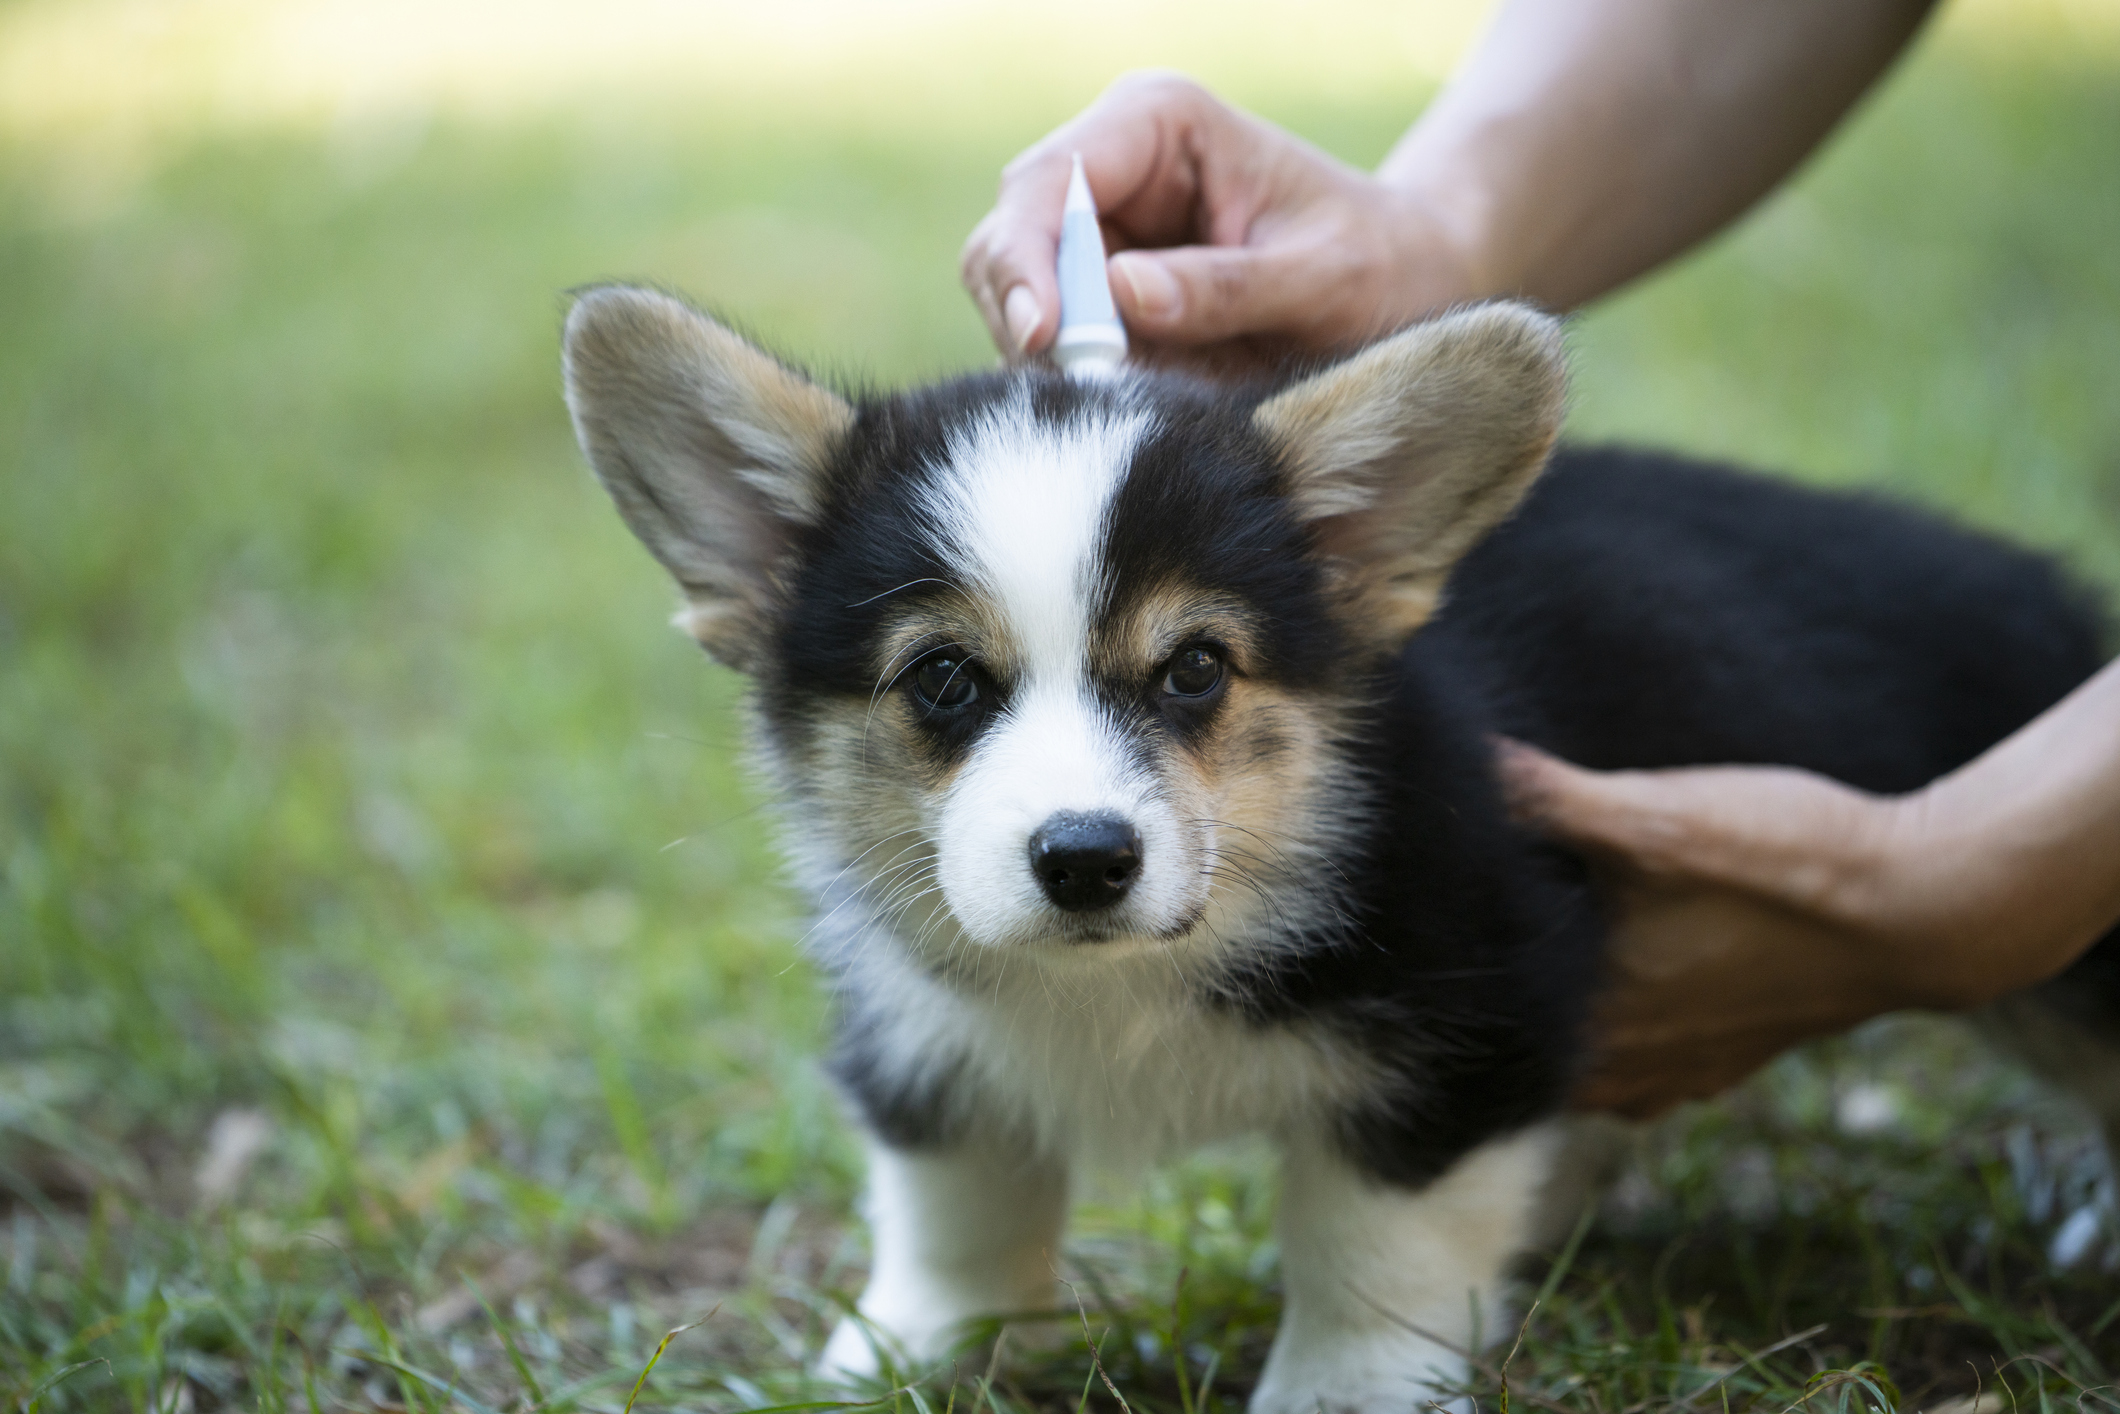 Frontline Flea And Tick Spray: How to Use & Advantages